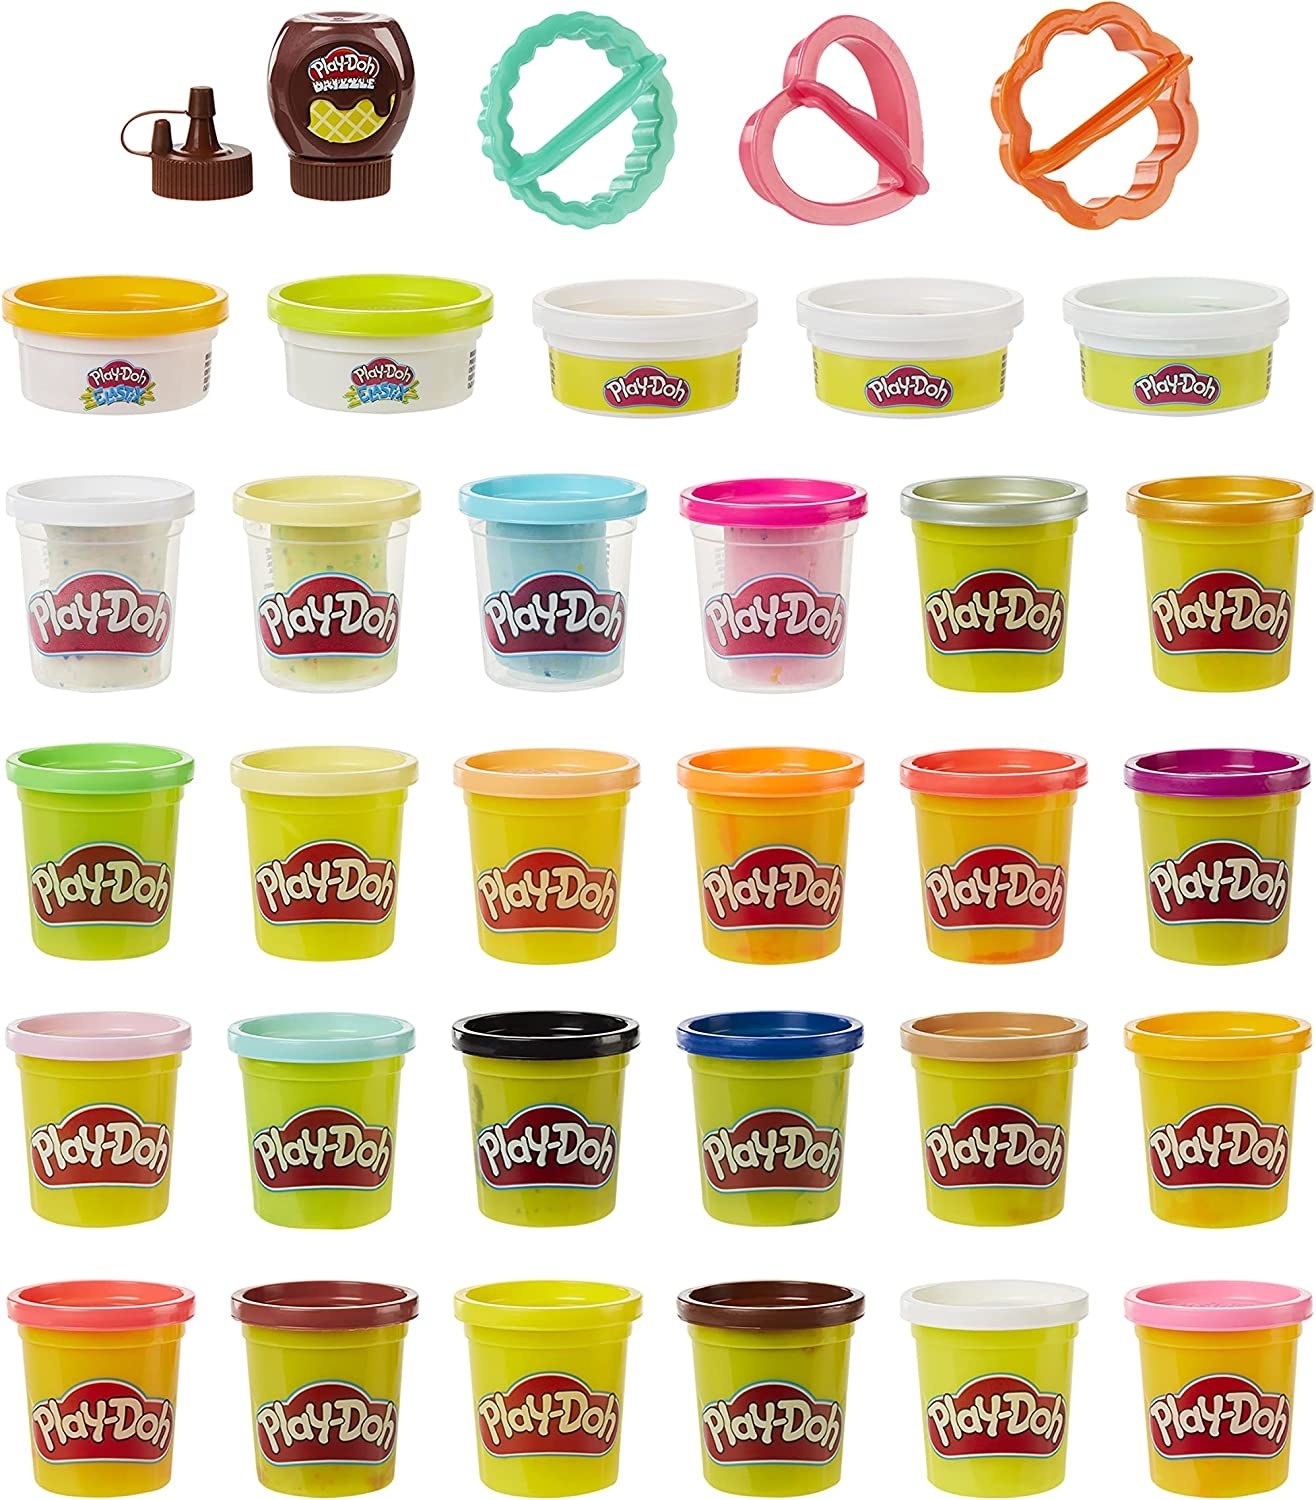 set of colorful Play-Doh containers